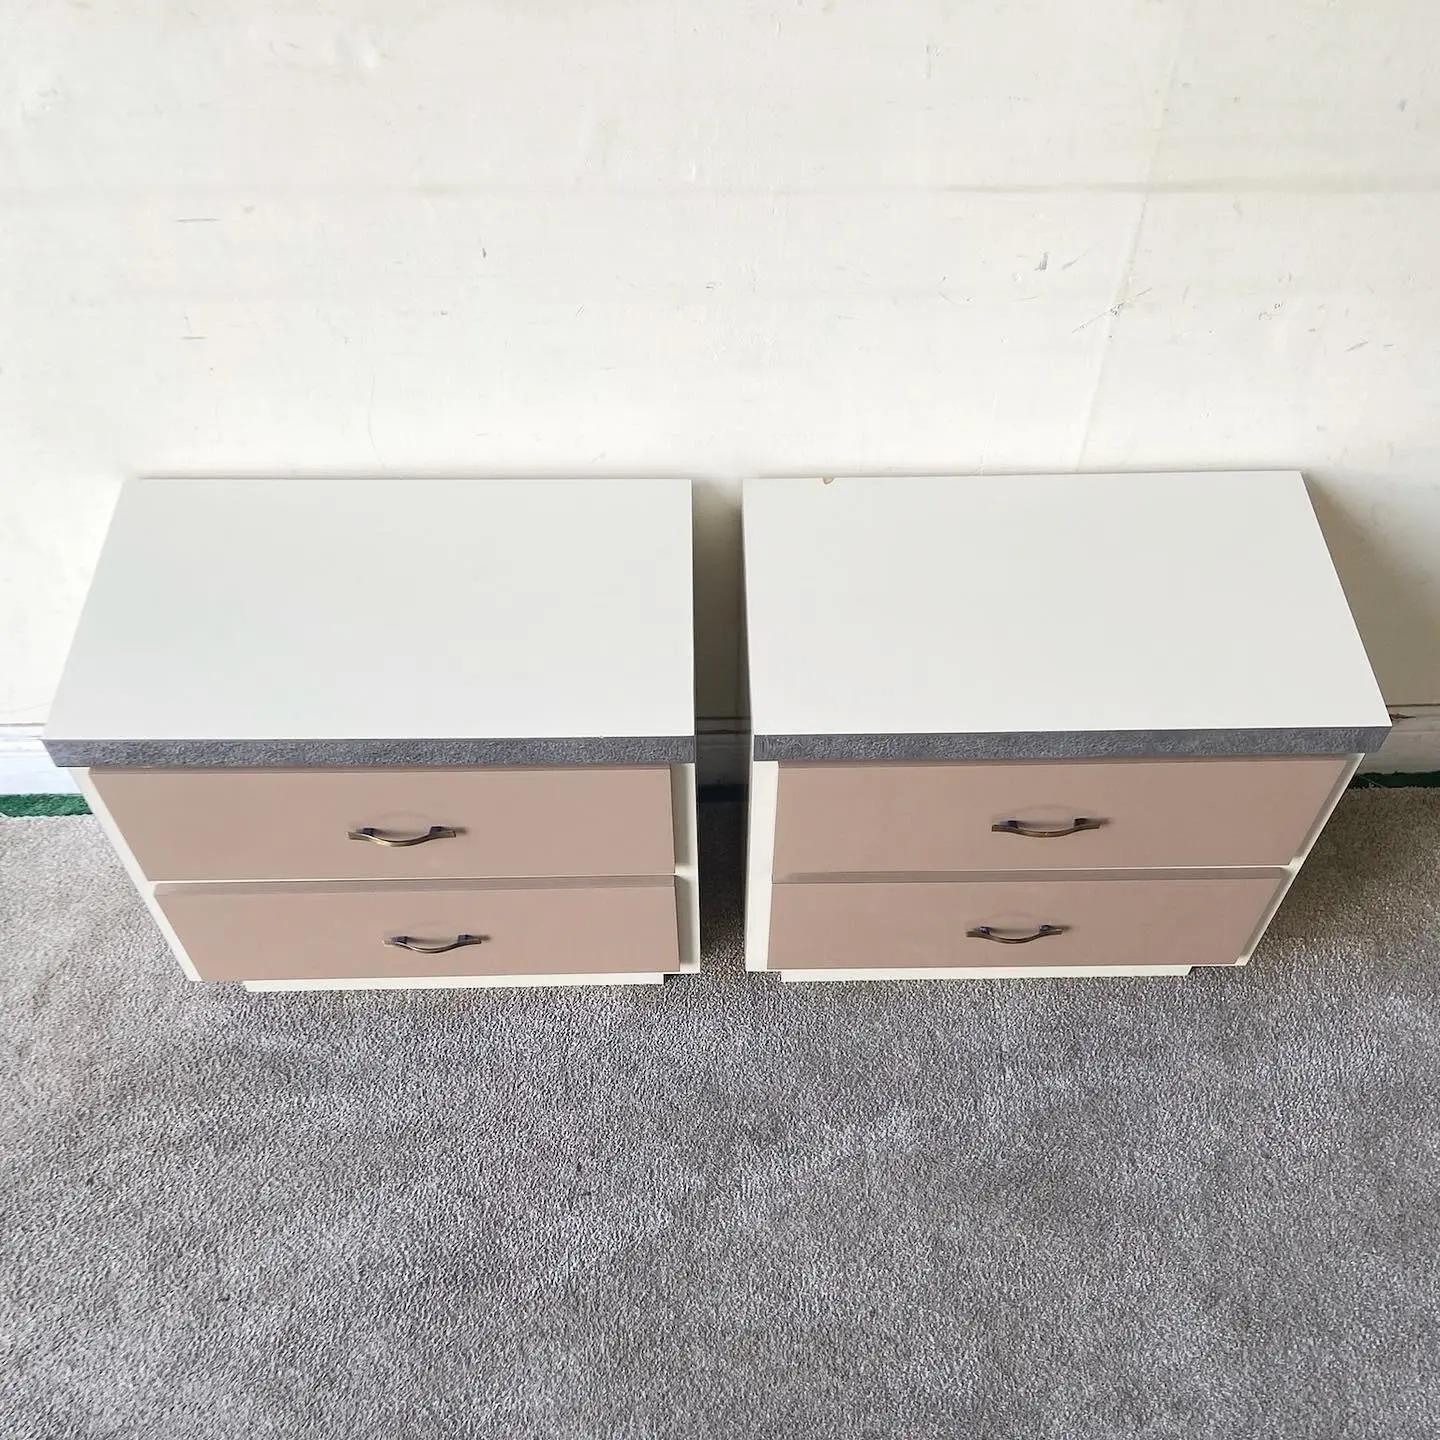 Post-Modern Pair of Postmodern Cream and Taupe Lacquer Laminate Nightstands